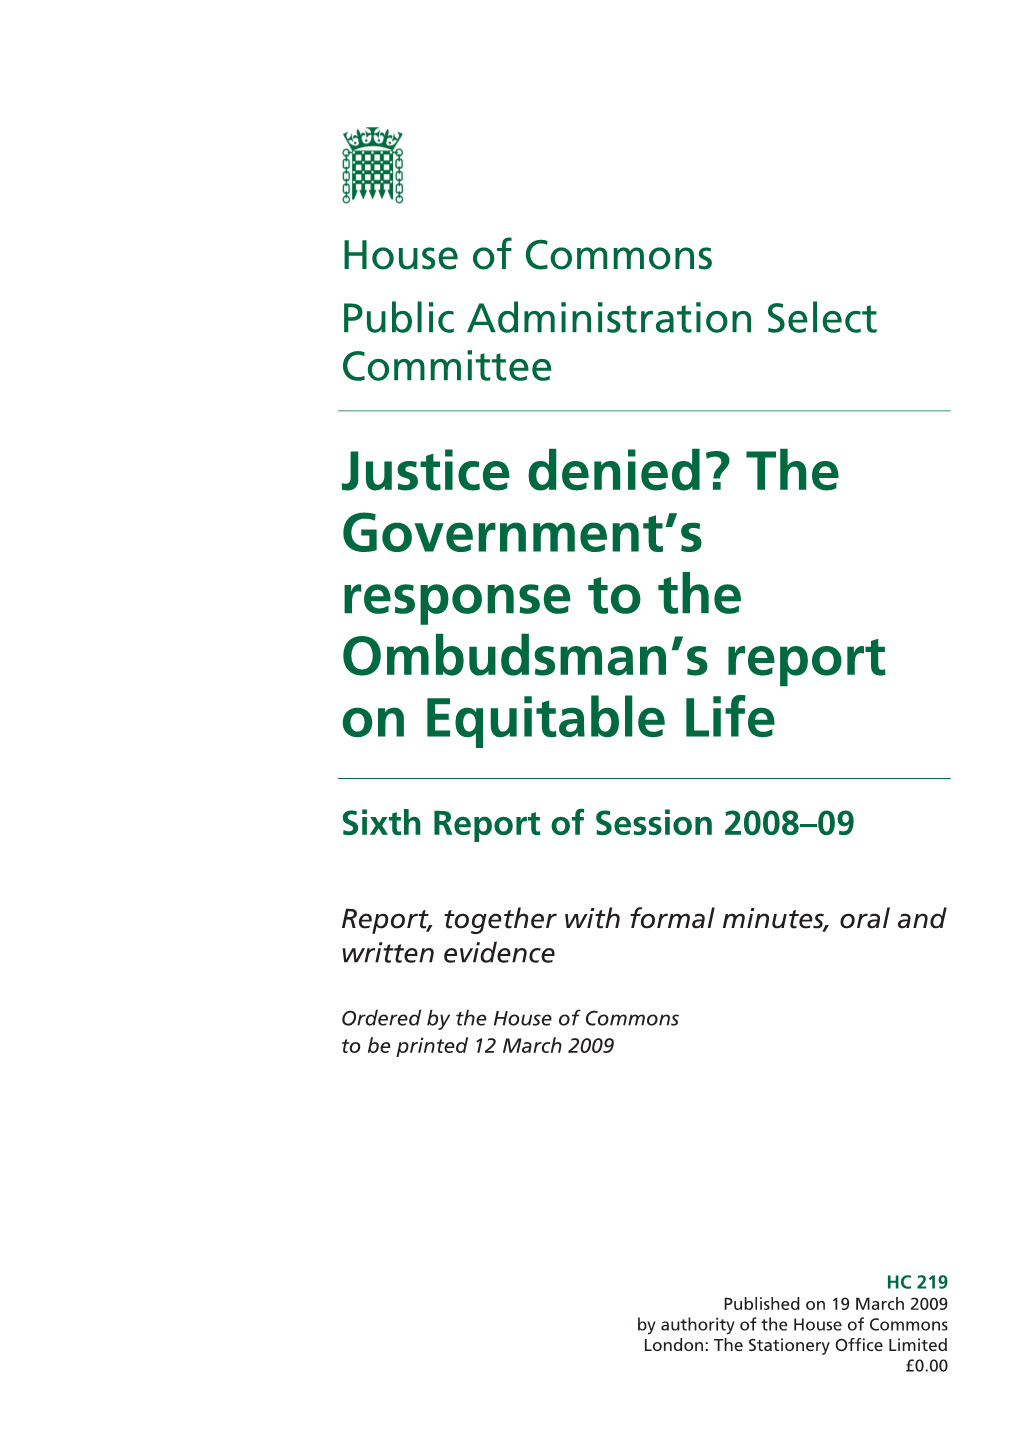 Justice Denied? the Government's Response to the Ombudsman's